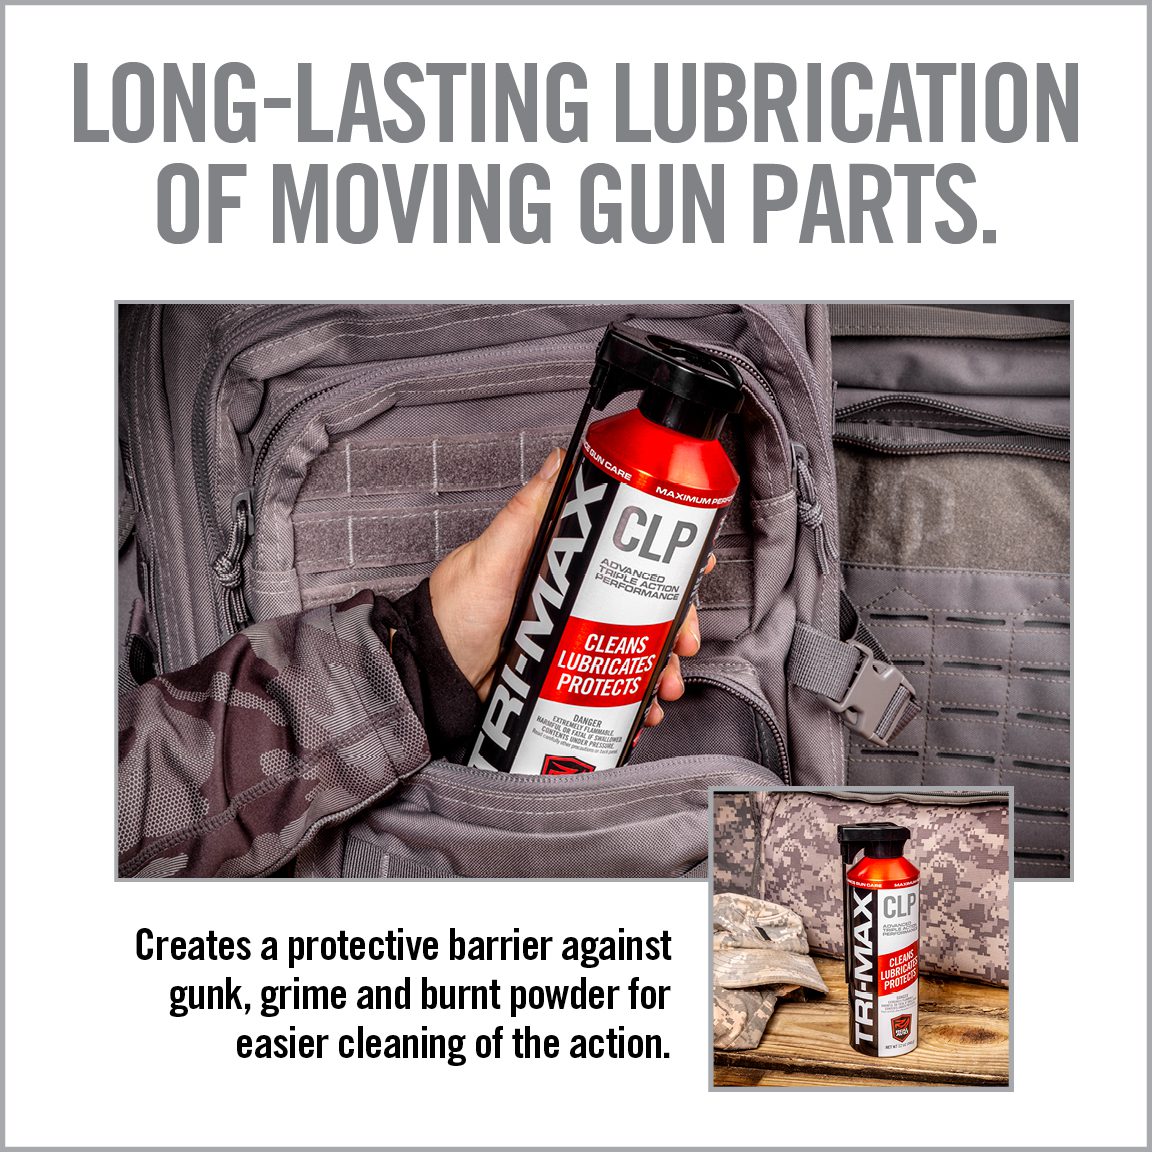 an advertisement for a gun cleaning product